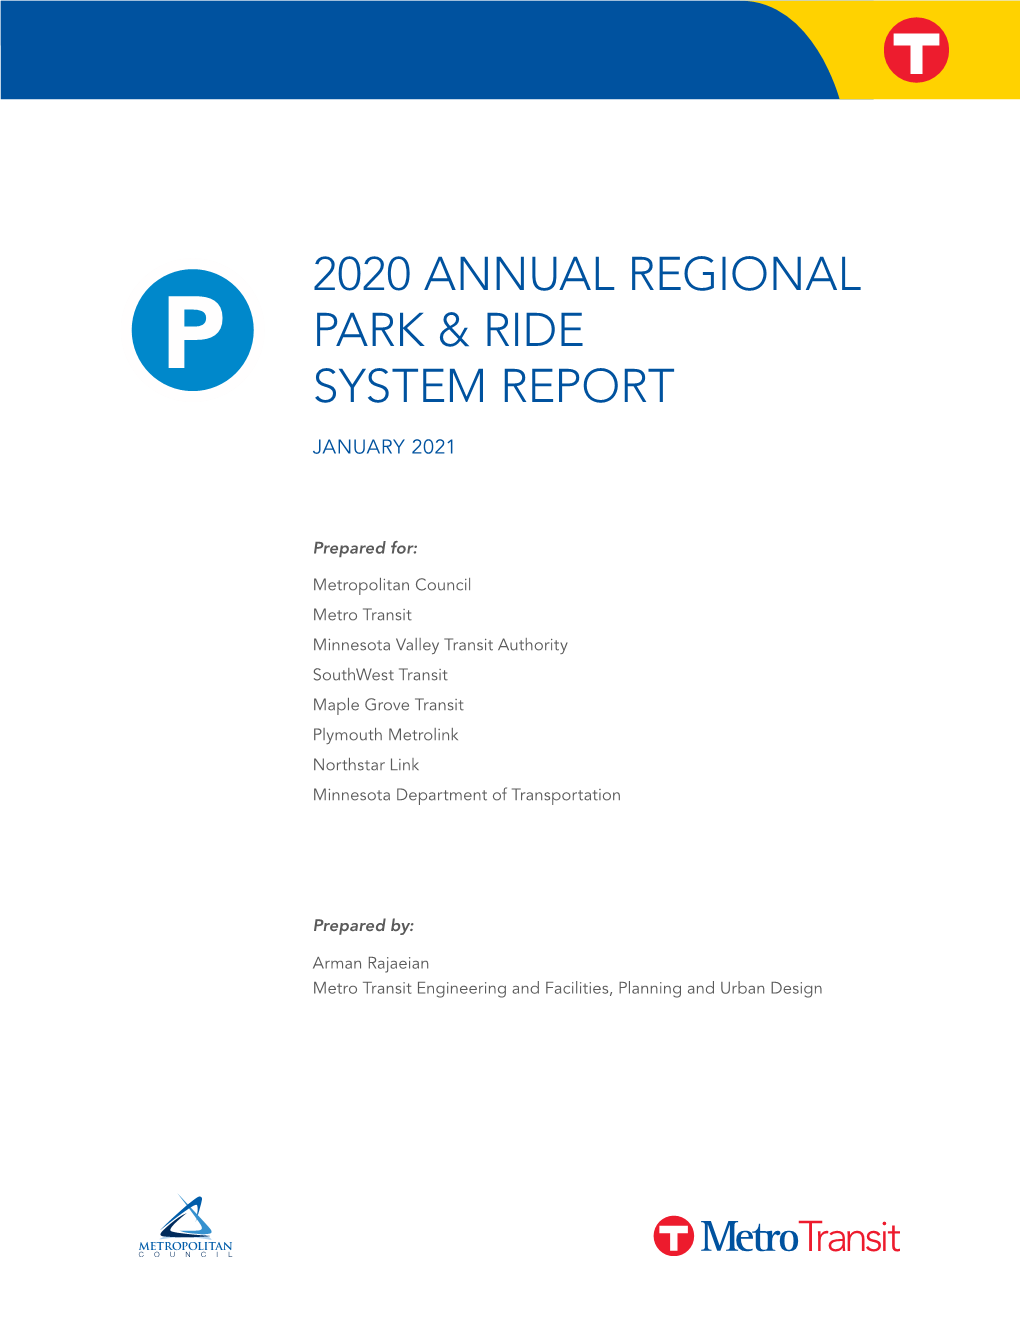 2020 Annual Regional Park-And-Ride System